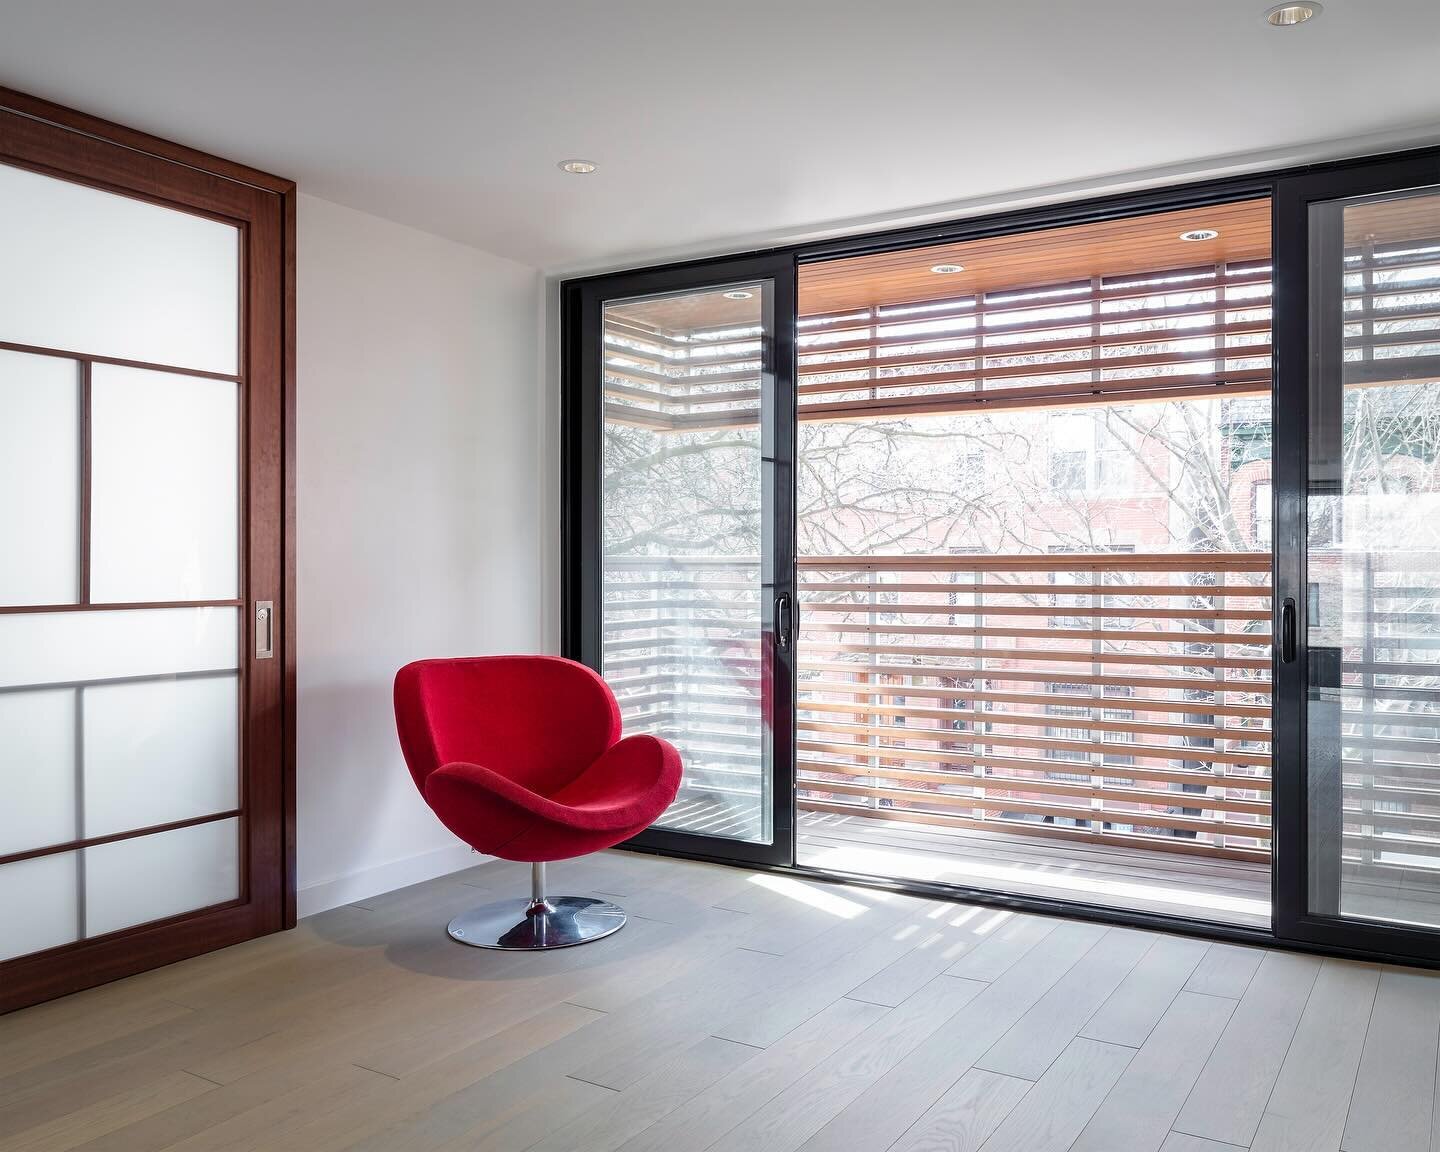 A study is tucked into a corner with the mezzanine level opening to a balcony facing the street, wrapped in cedar slats for privacy. 

The open-tread stair wrapping the black steel-clad wall link all five levels of the townhouse and become a focal po